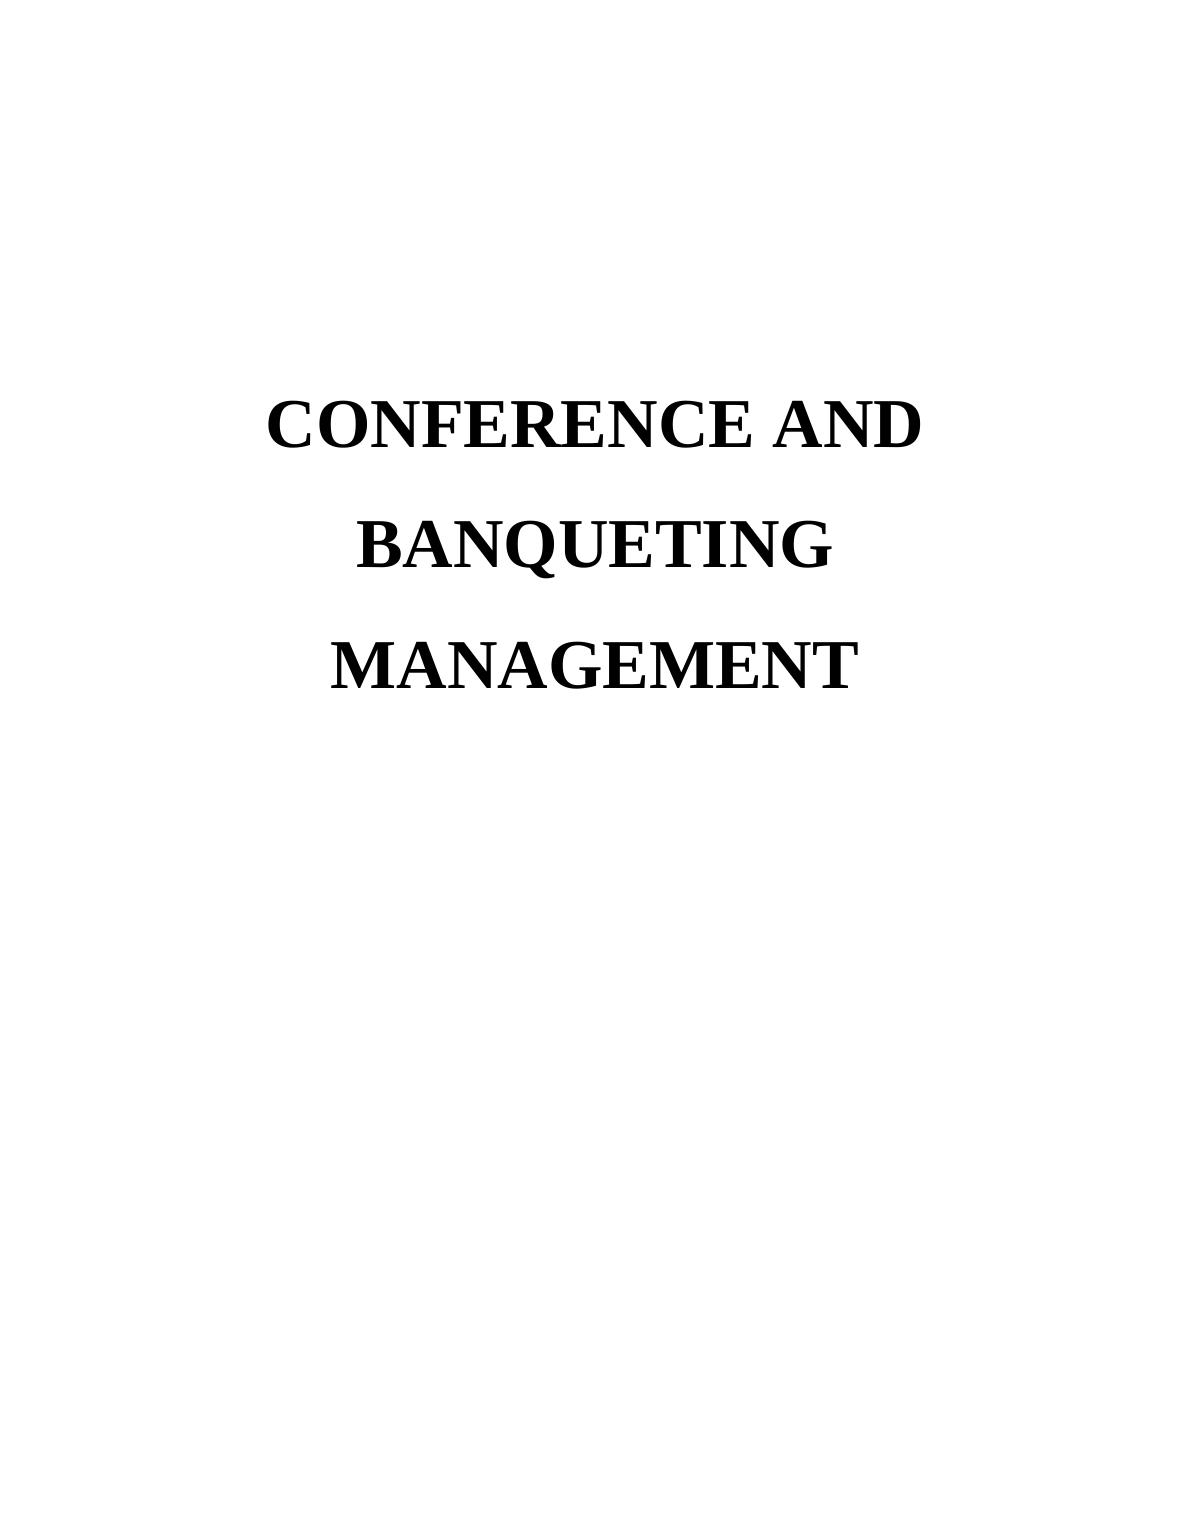 Conference and Banqueting  Management  Assignment Sample_1